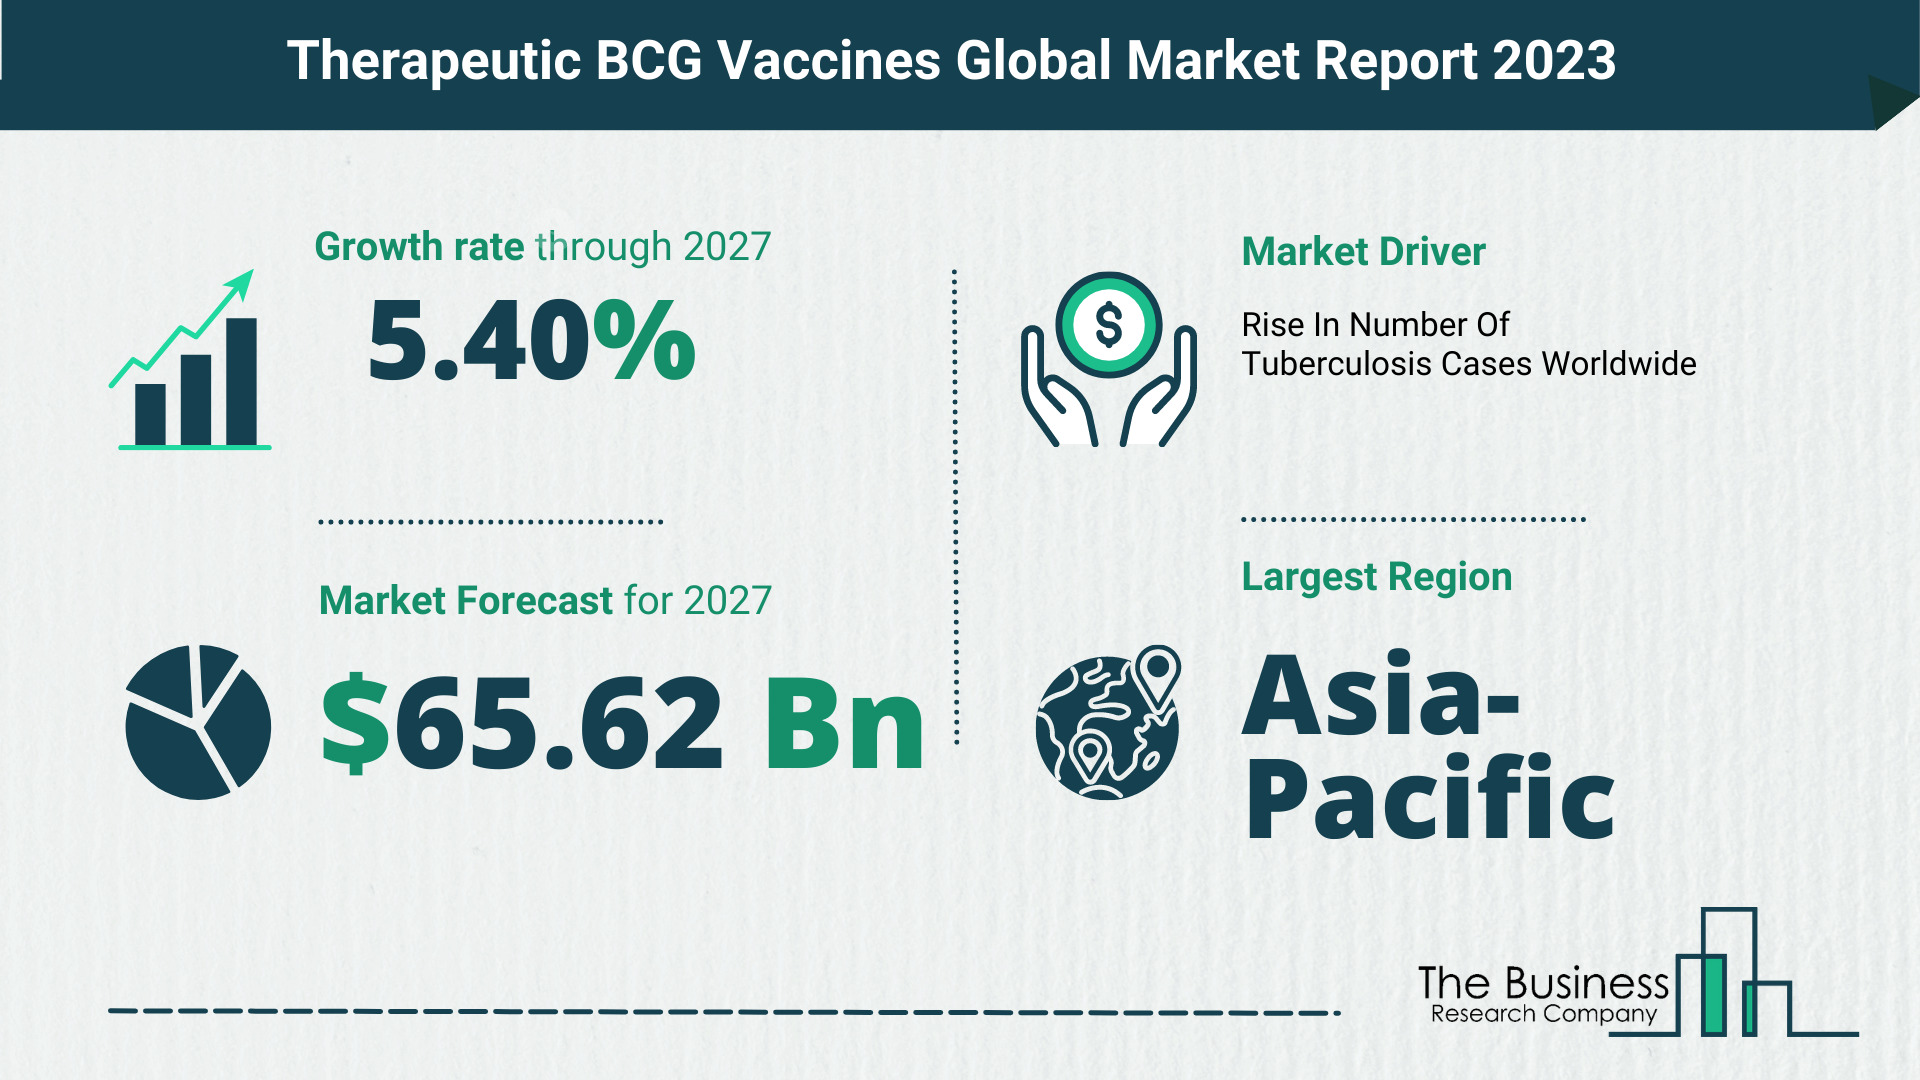 What Will The Therapeutic BCG Vaccines Market Look Like In 2023?